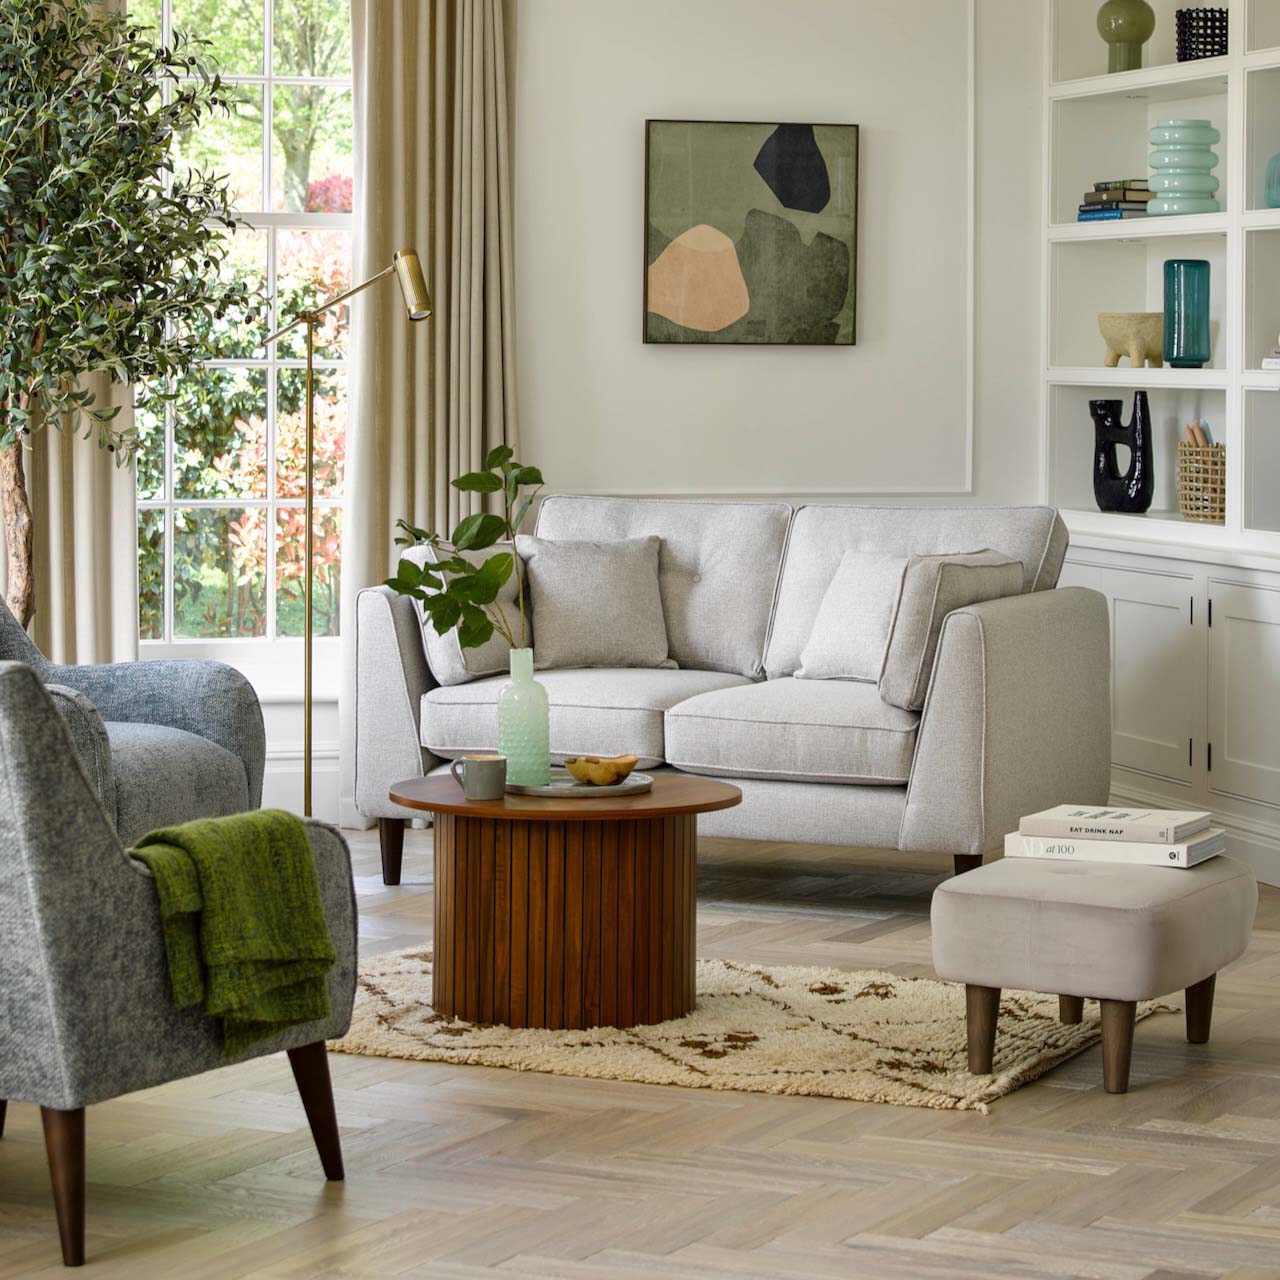 An airy front room decorated in neutral tones